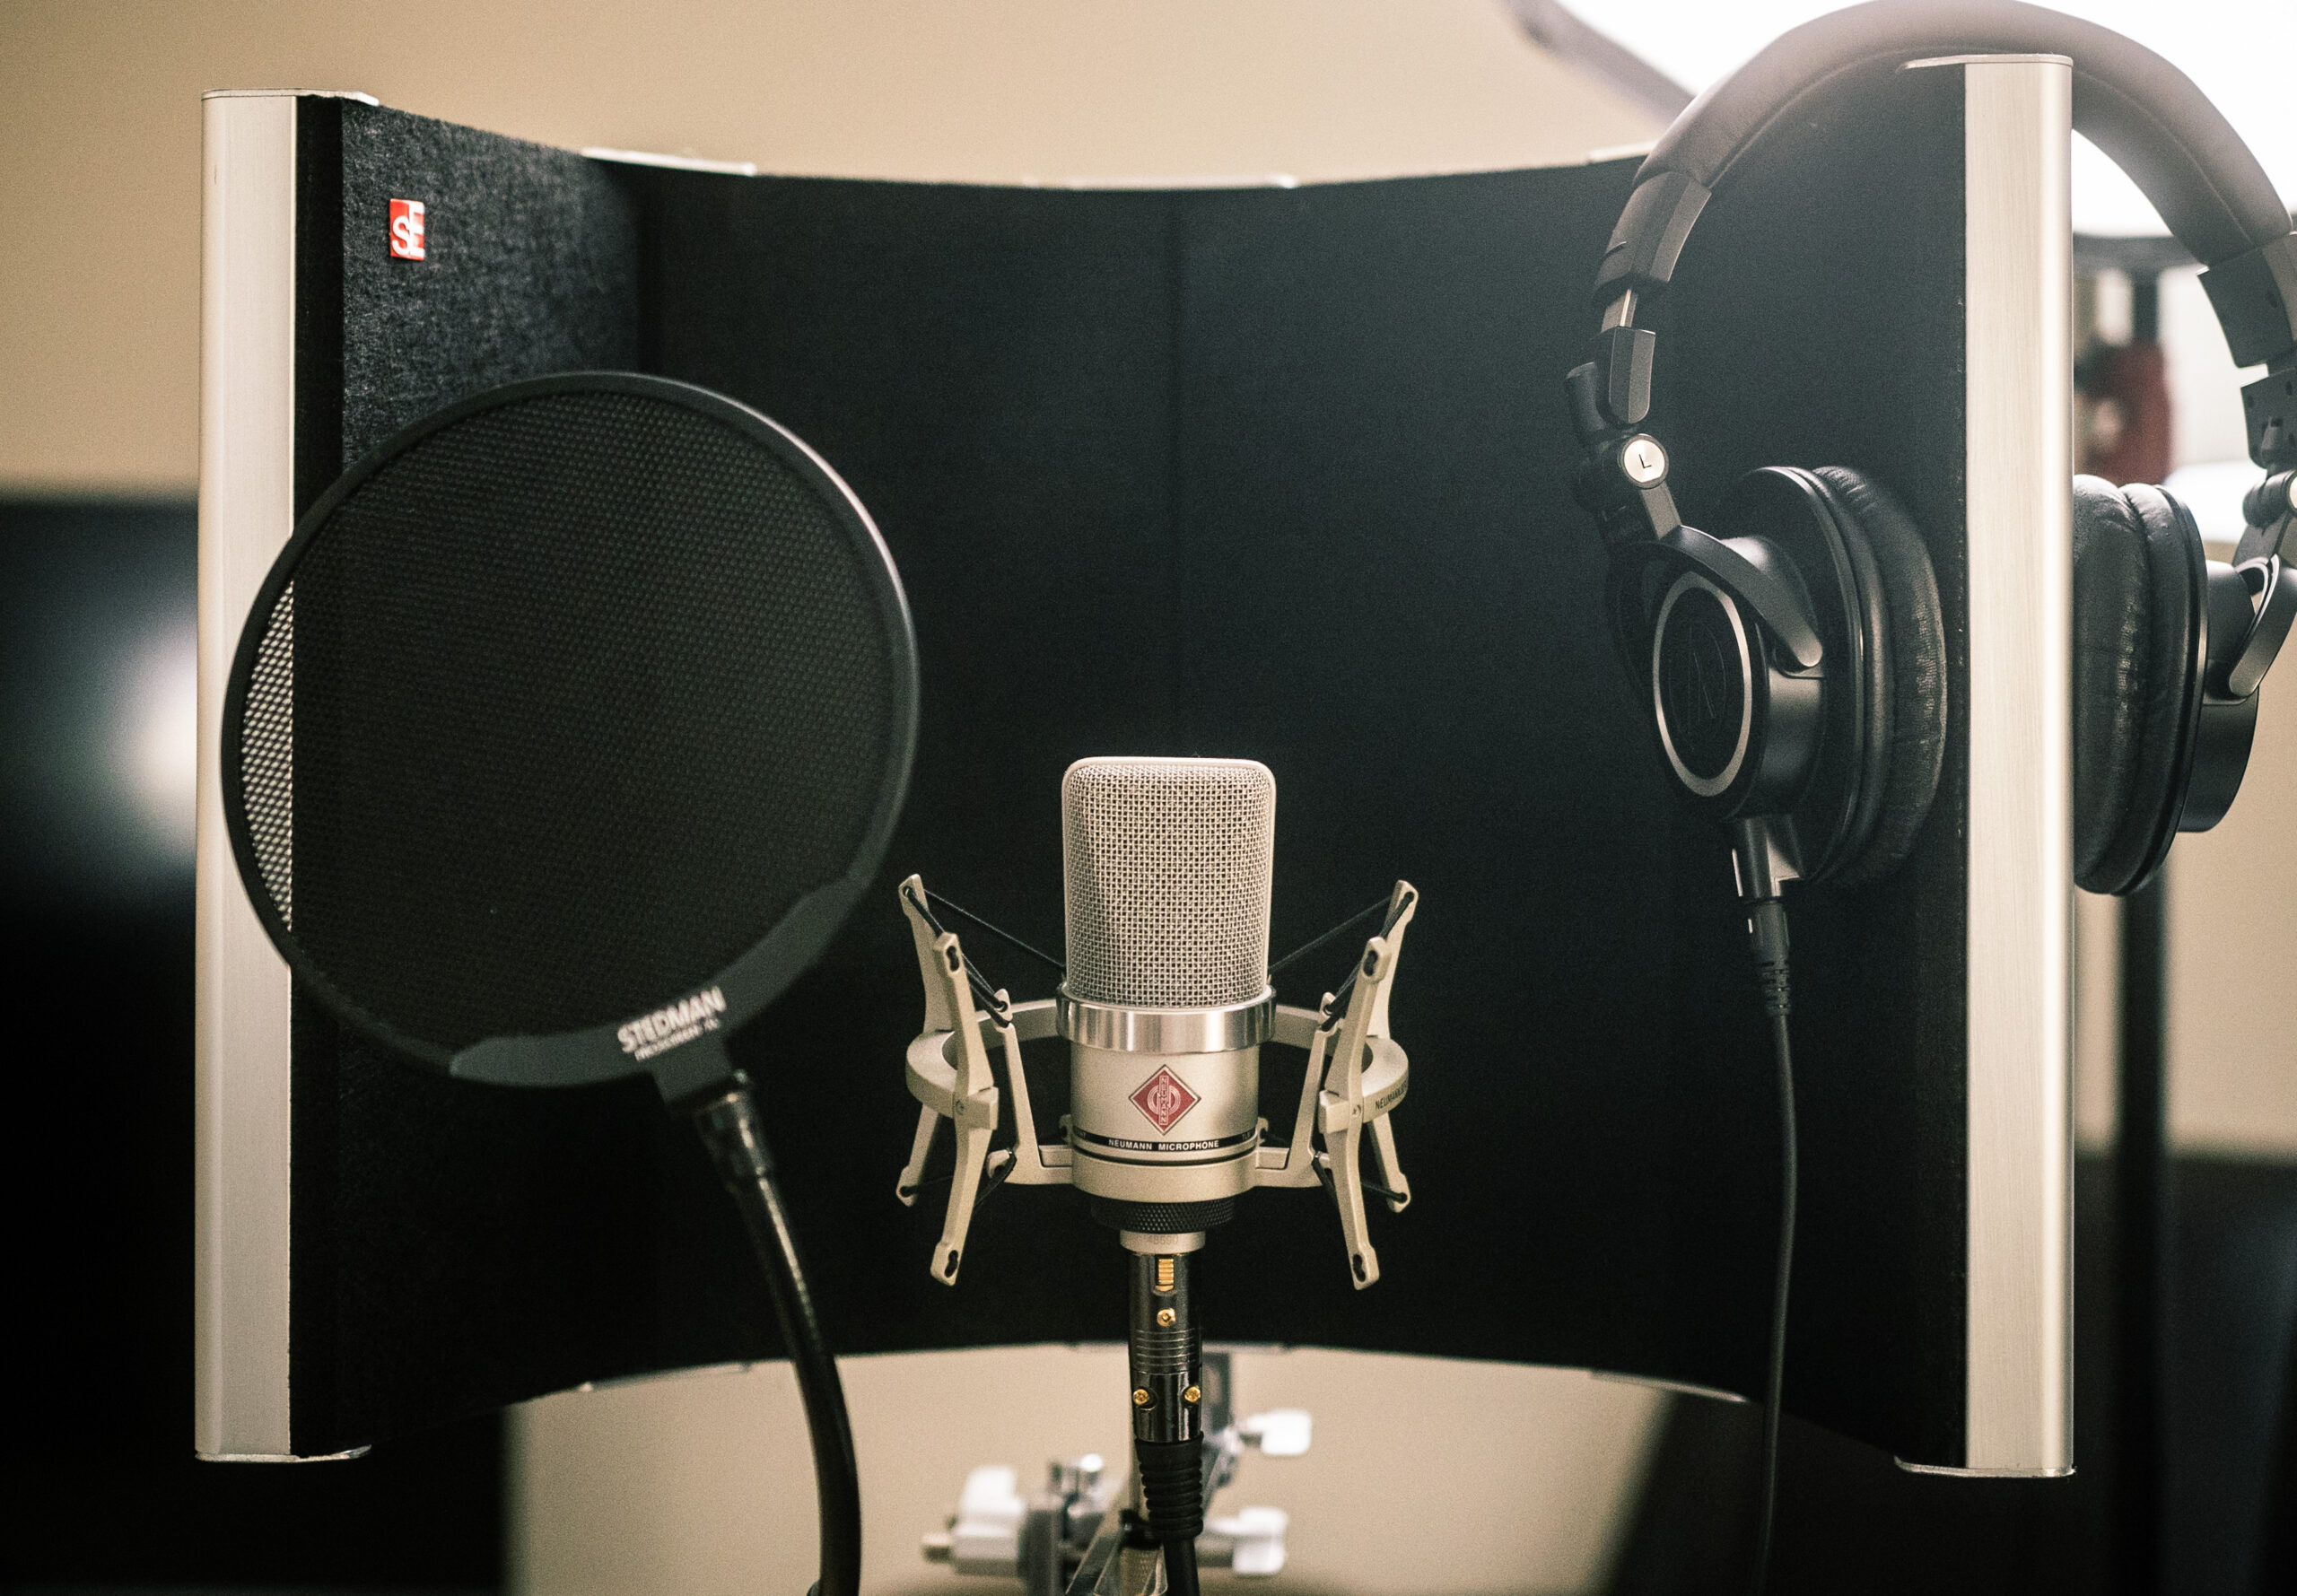 A professional recording microphone sits between a pair of headphones and a sound baffle in a recording booth.